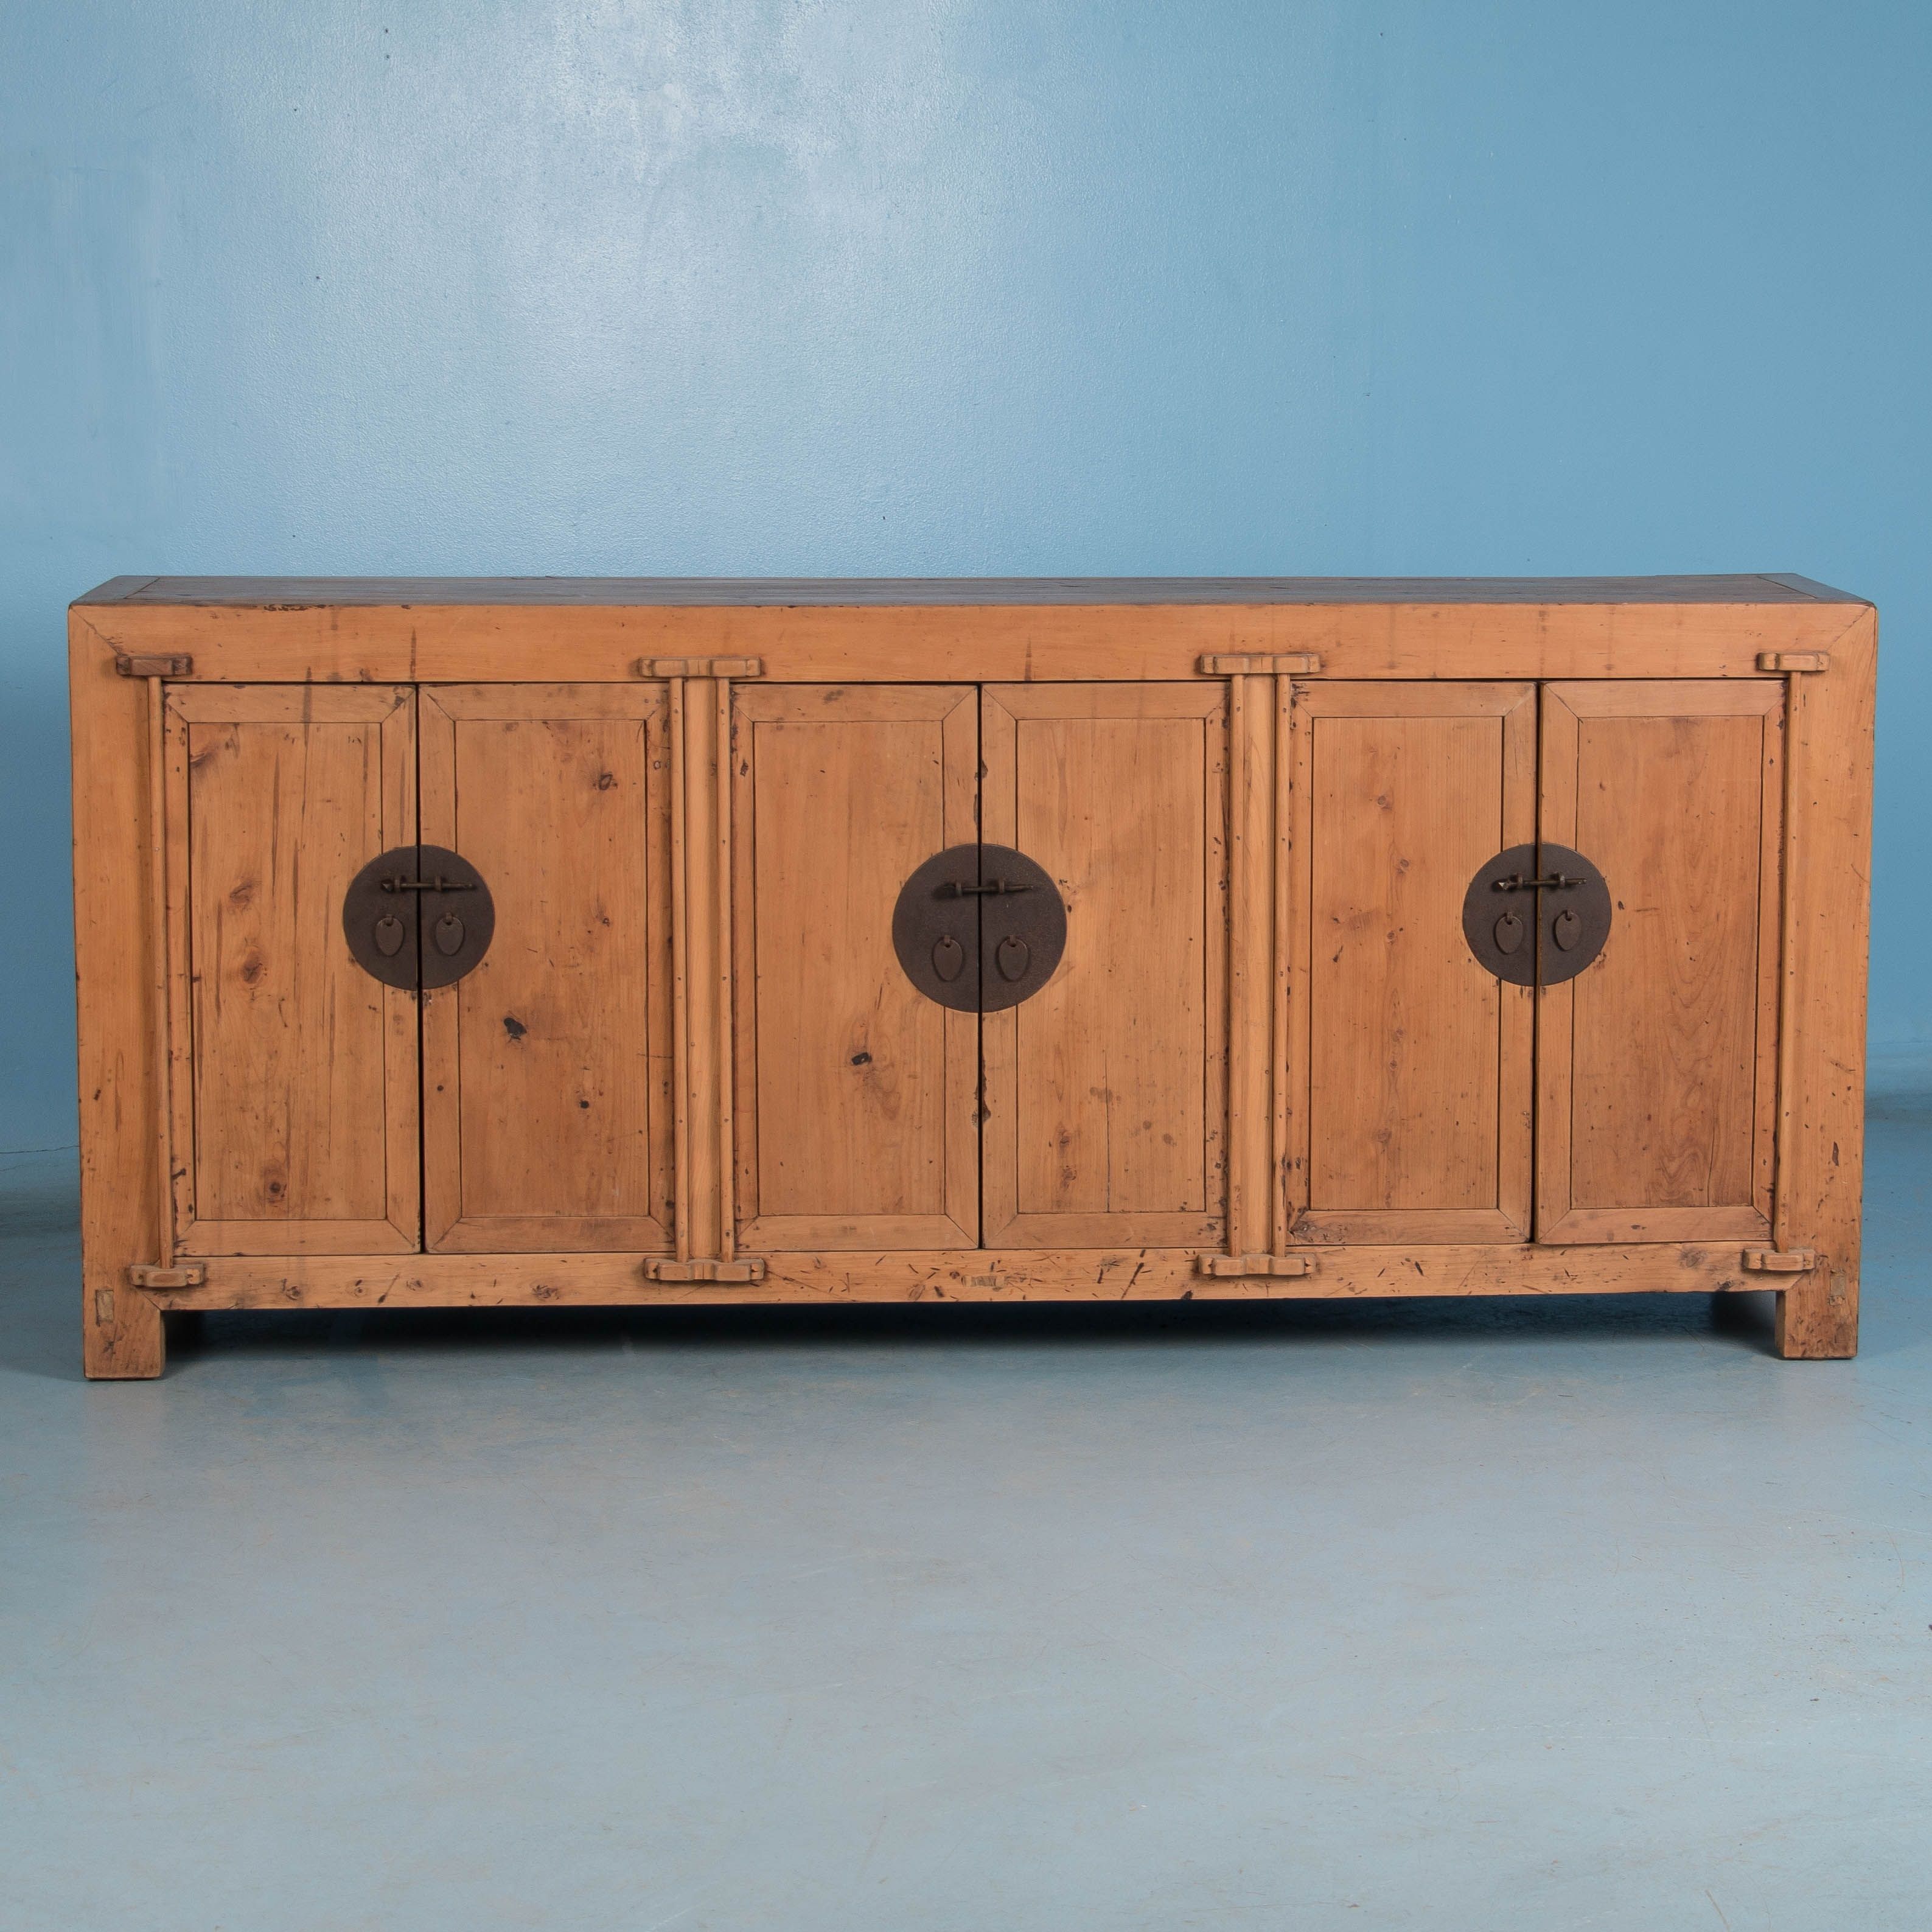 Sideboards | Scandinavian Antiques | Antique Furniture For Sale With Regard To Most Recent Natural Oak Wood 78 Inch Sideboards (Photo 14 of 20)